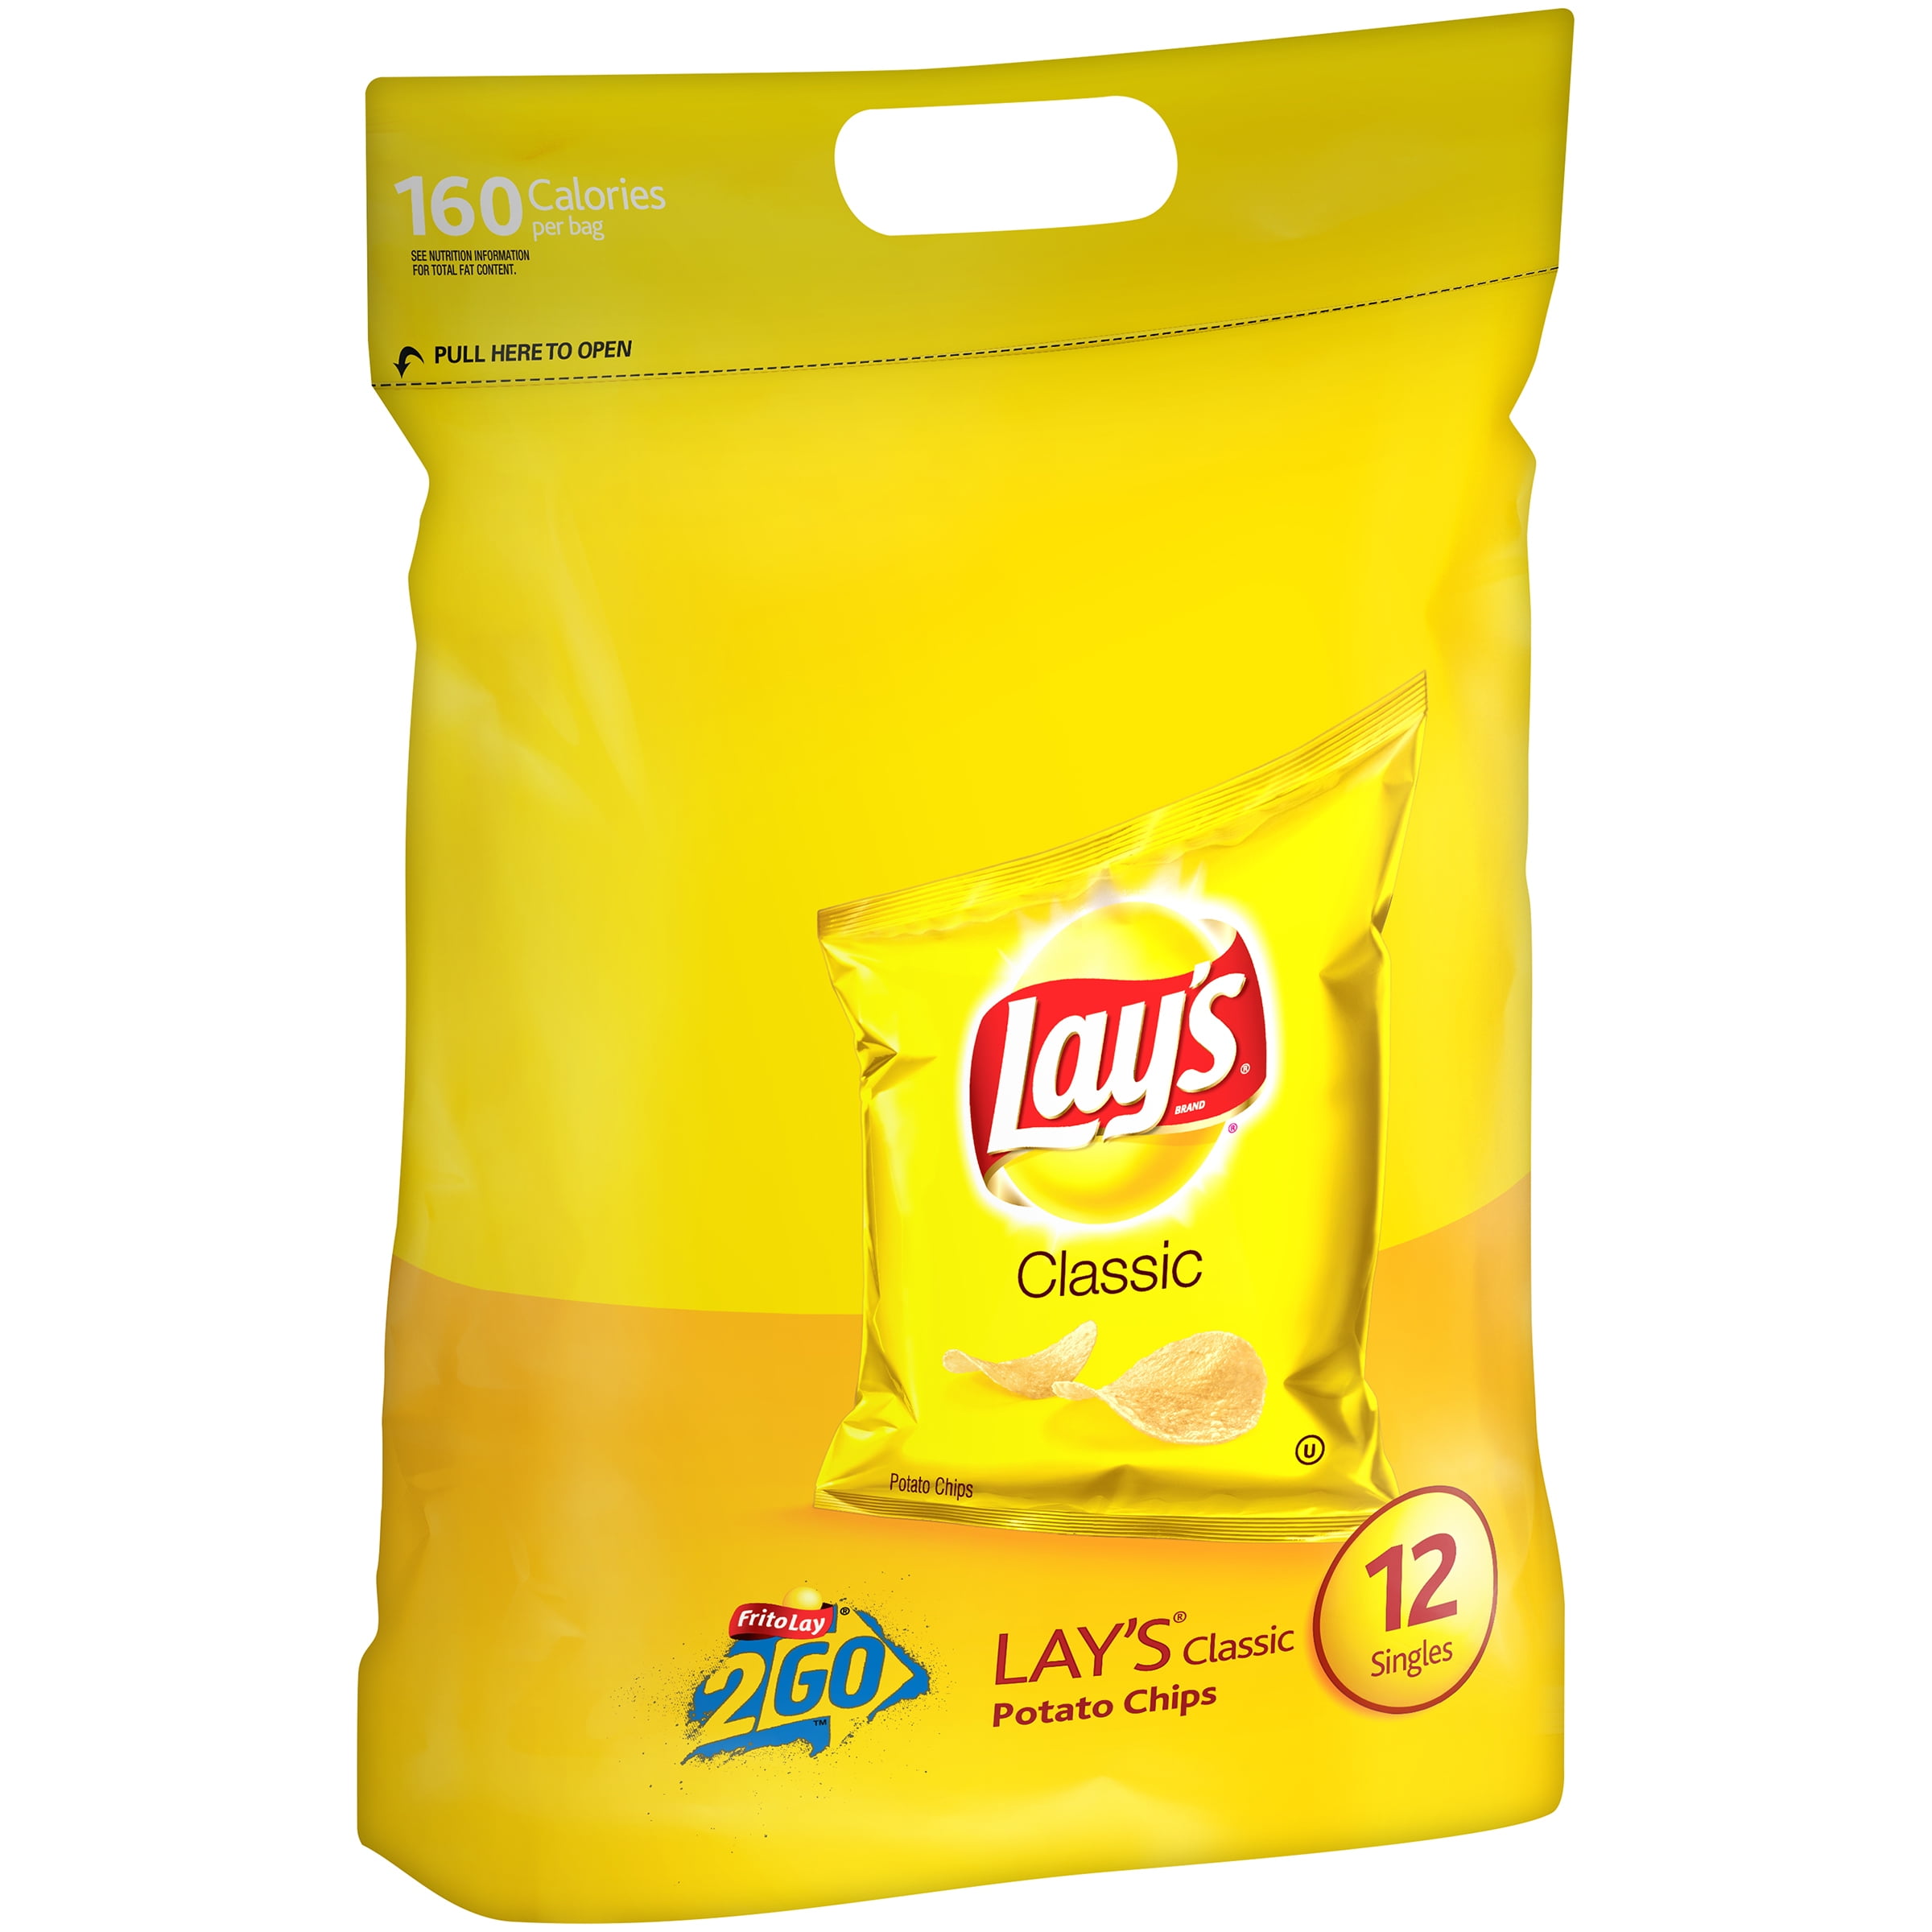 Lay's Classic Potato Chips, 12 count, 1 oz Bags 